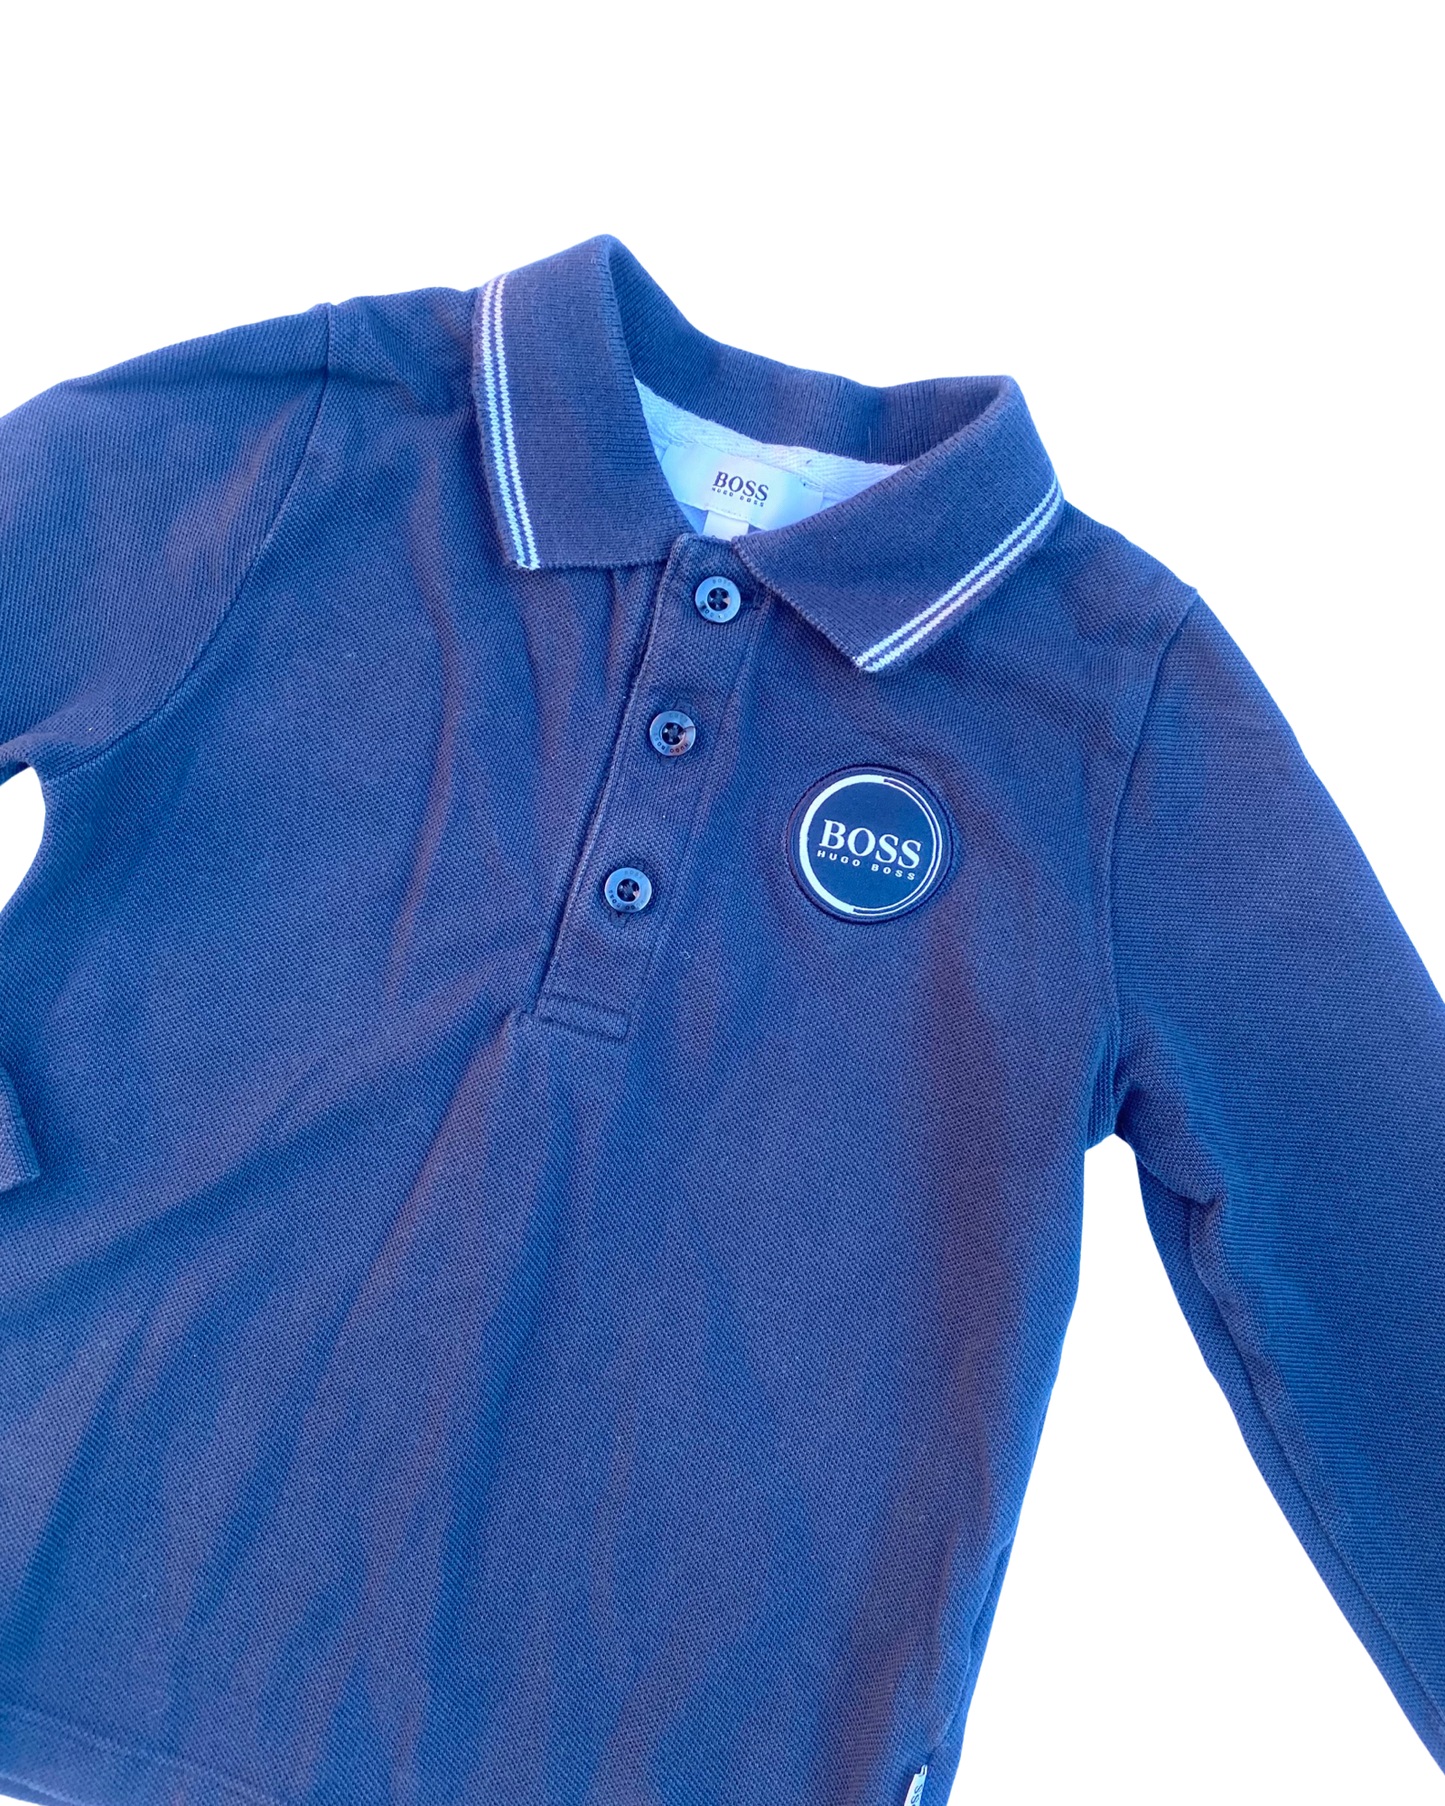 Hugo Boss vintage polo shirt in Navy (size 2-3yrs)